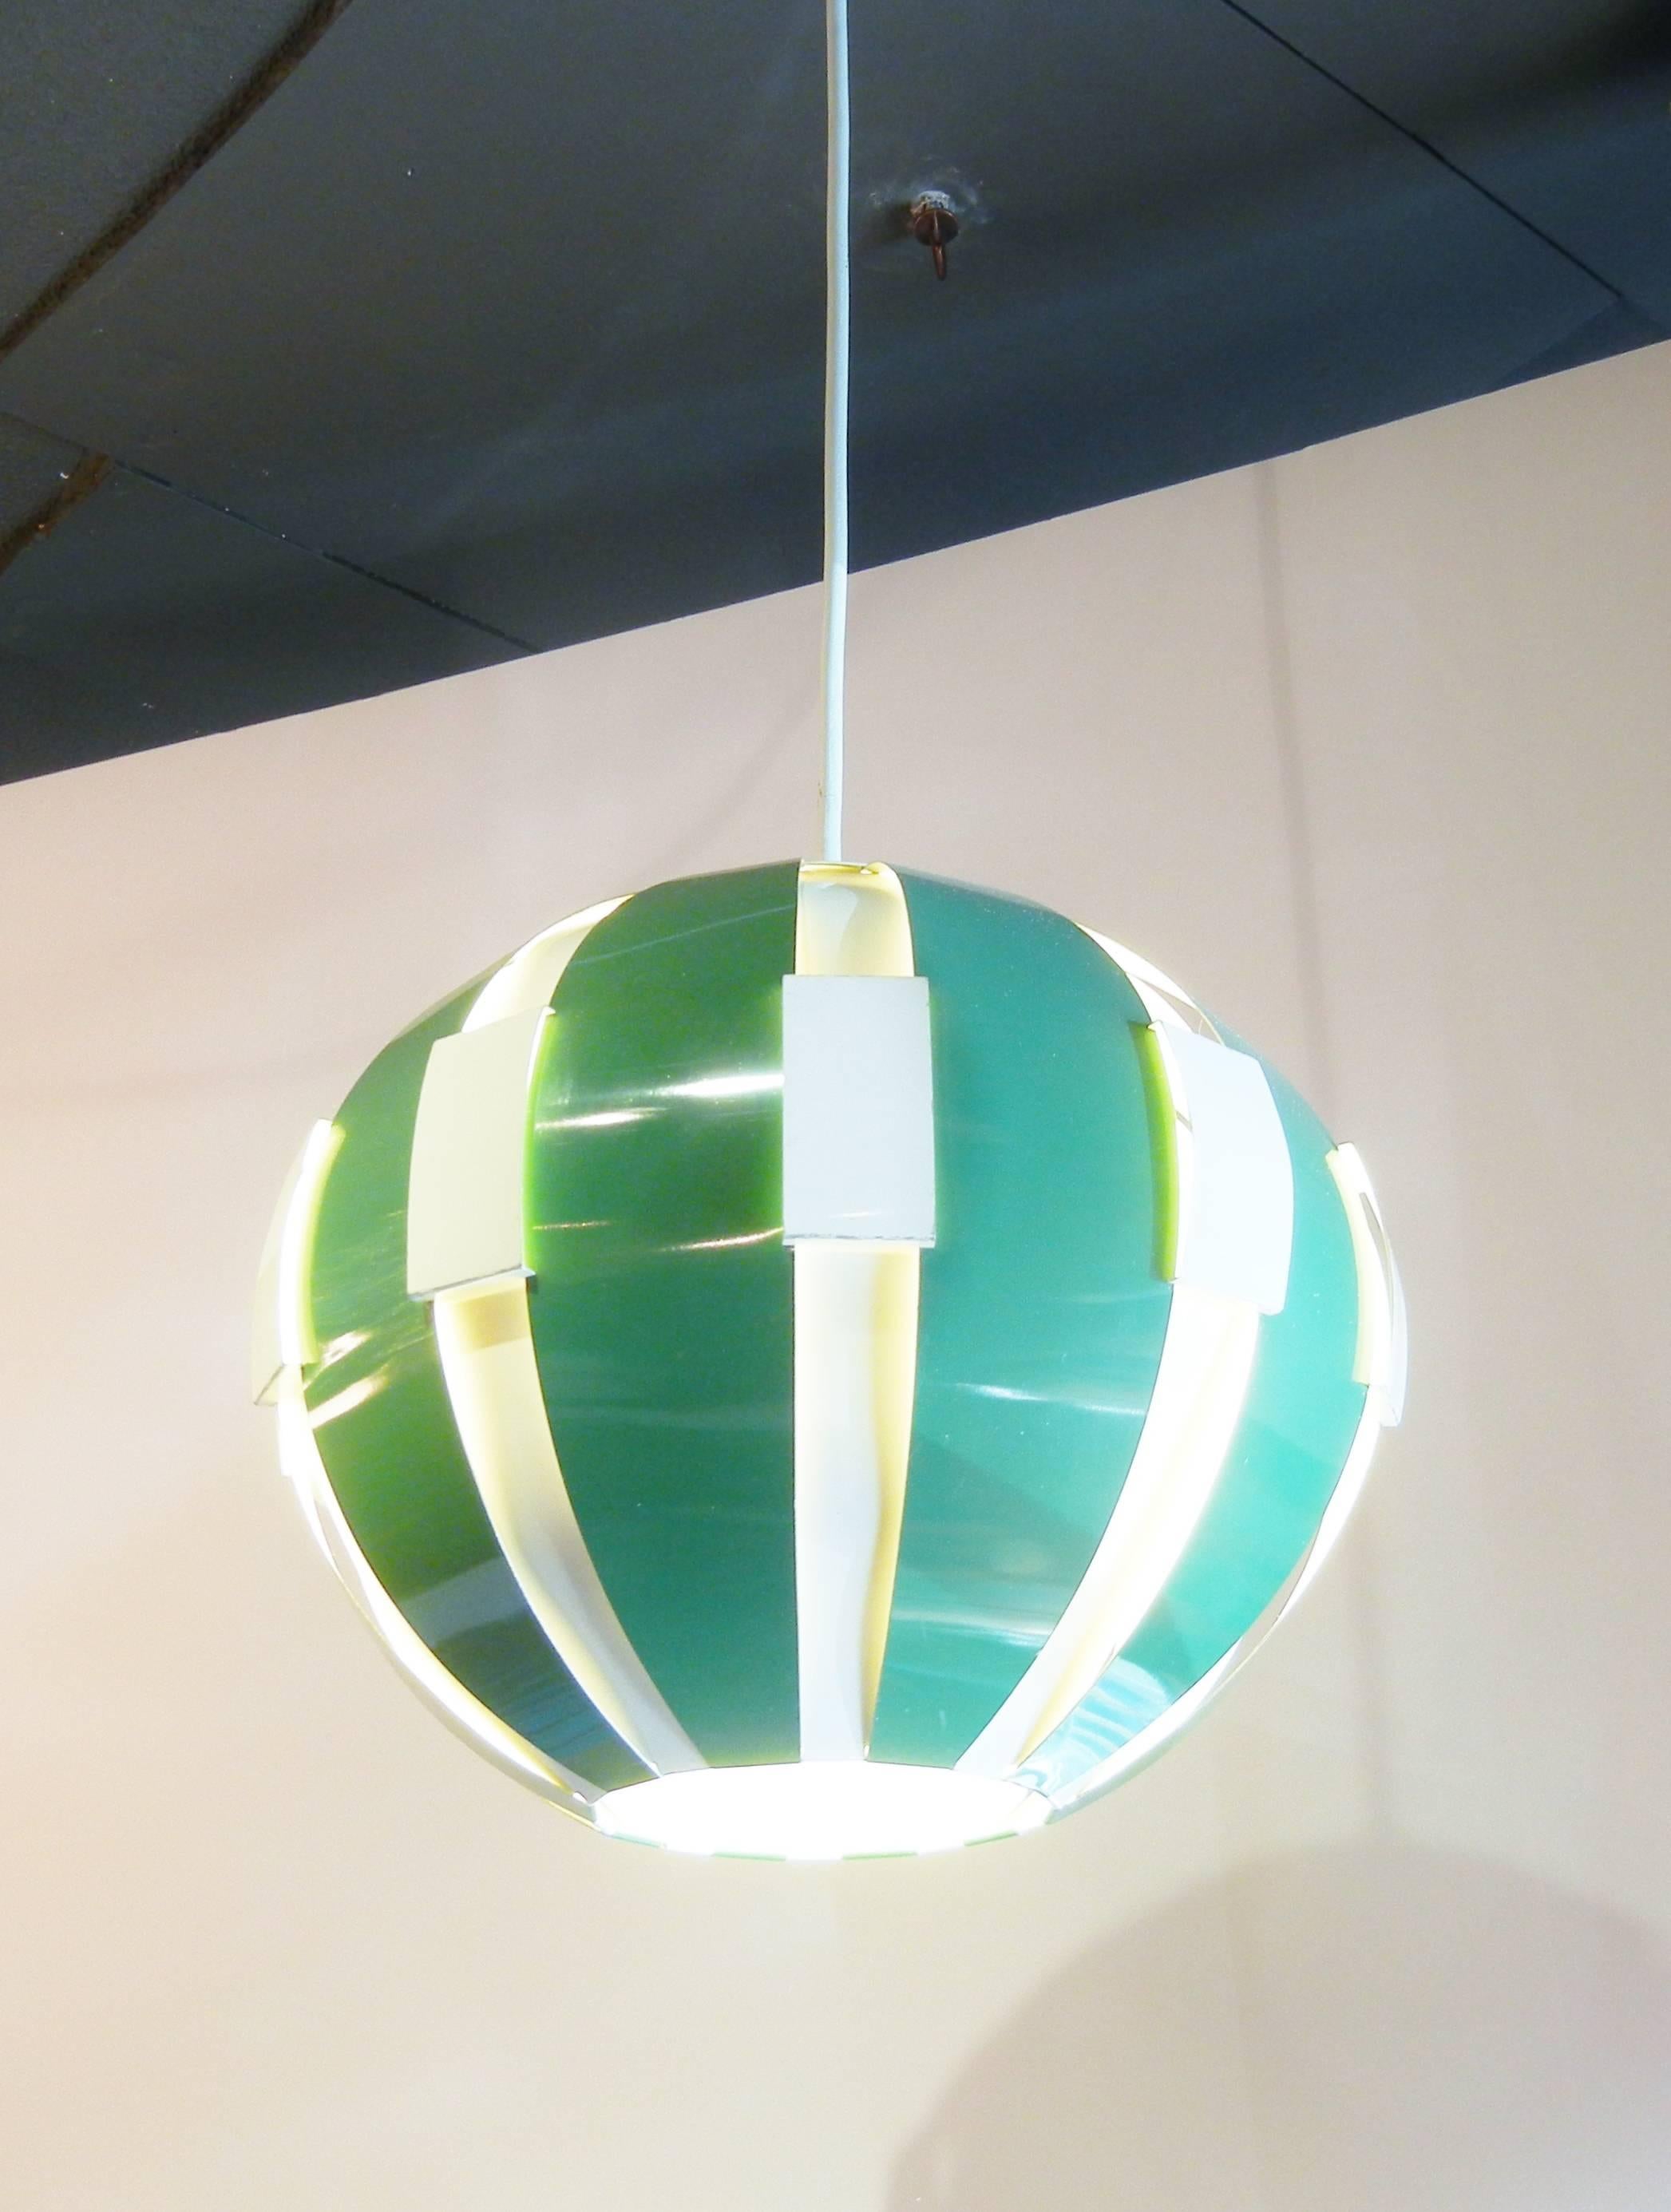 Space Age Telstar, 1st US Satellite, Pendant Lamp in Green and Ivory Aluminum, 1962